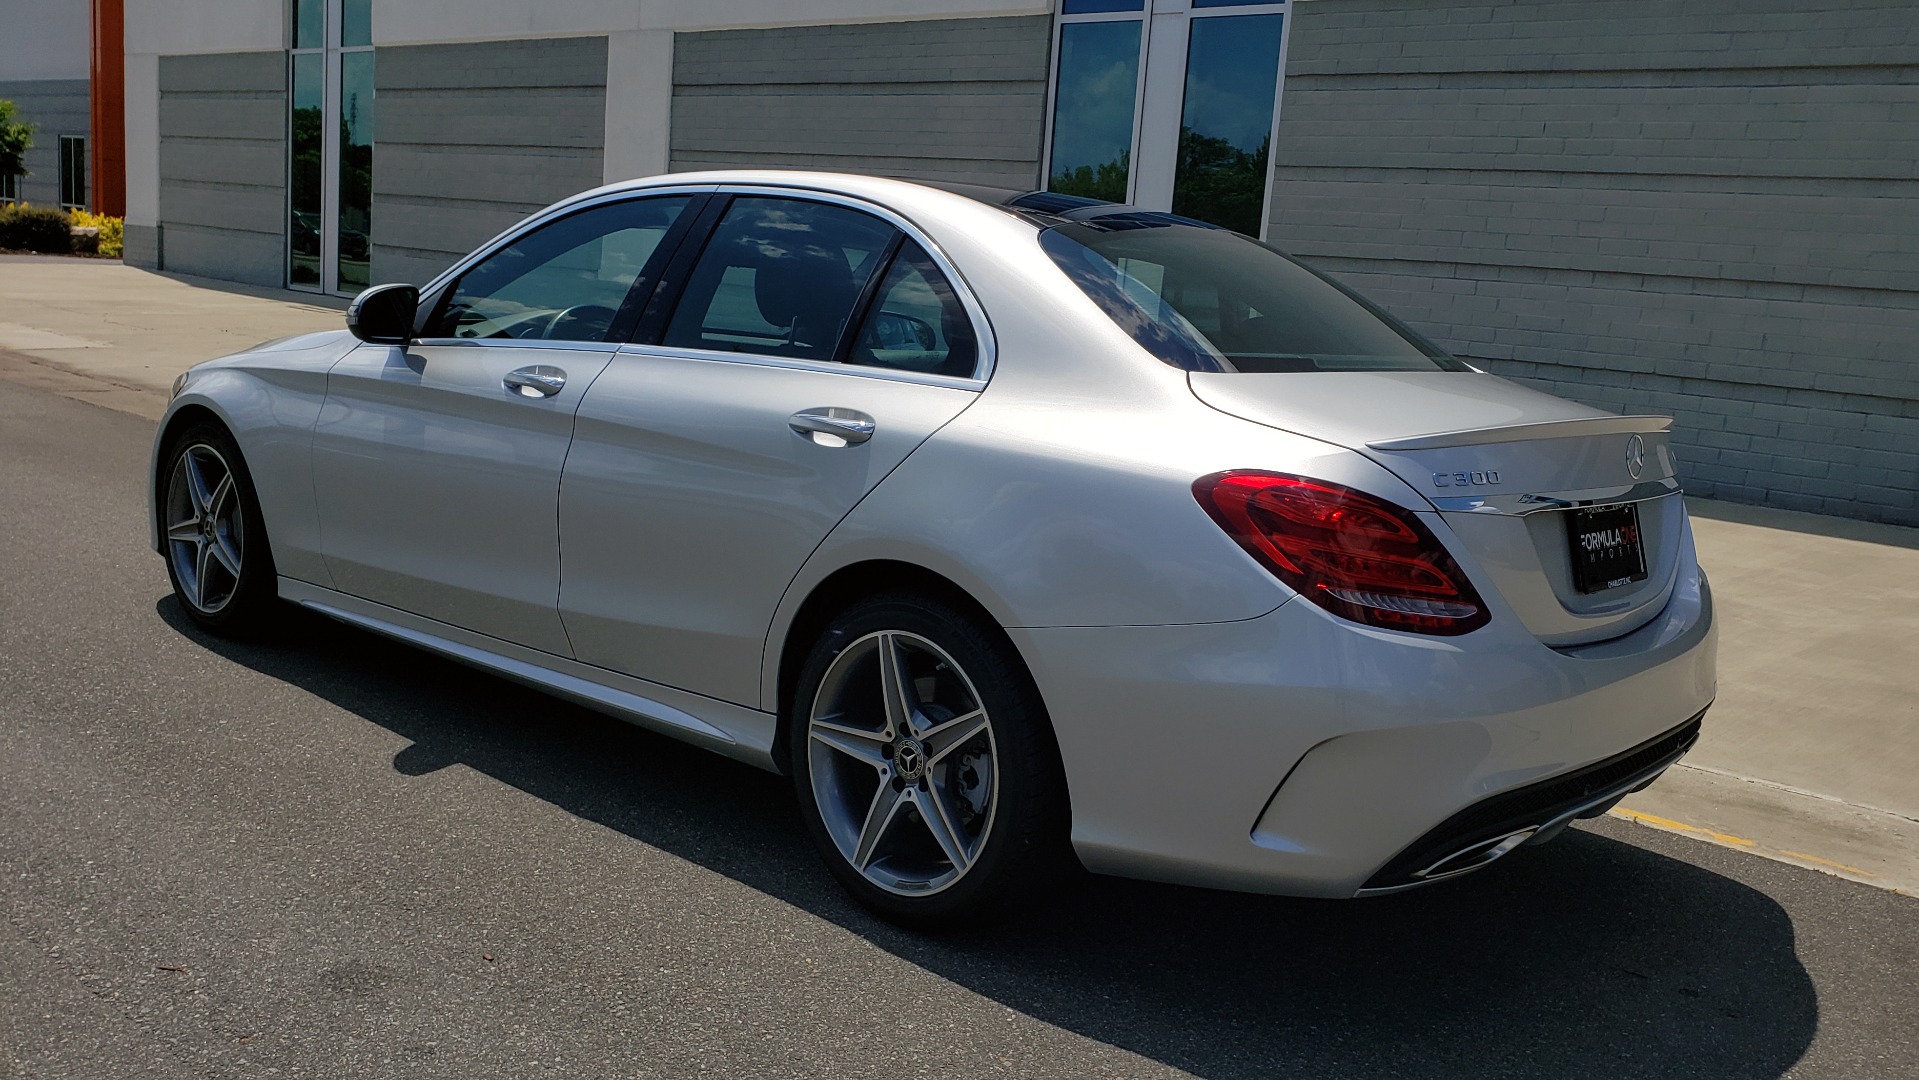 Used 2018 Mercedes-Benz C-CLASS C 300 4MATIC / PREMIUM PKG / PANO-ROOF / AMG LINE / BURMESTER / REARVIEW for sale Sold at Formula Imports in Charlotte NC 28227 7